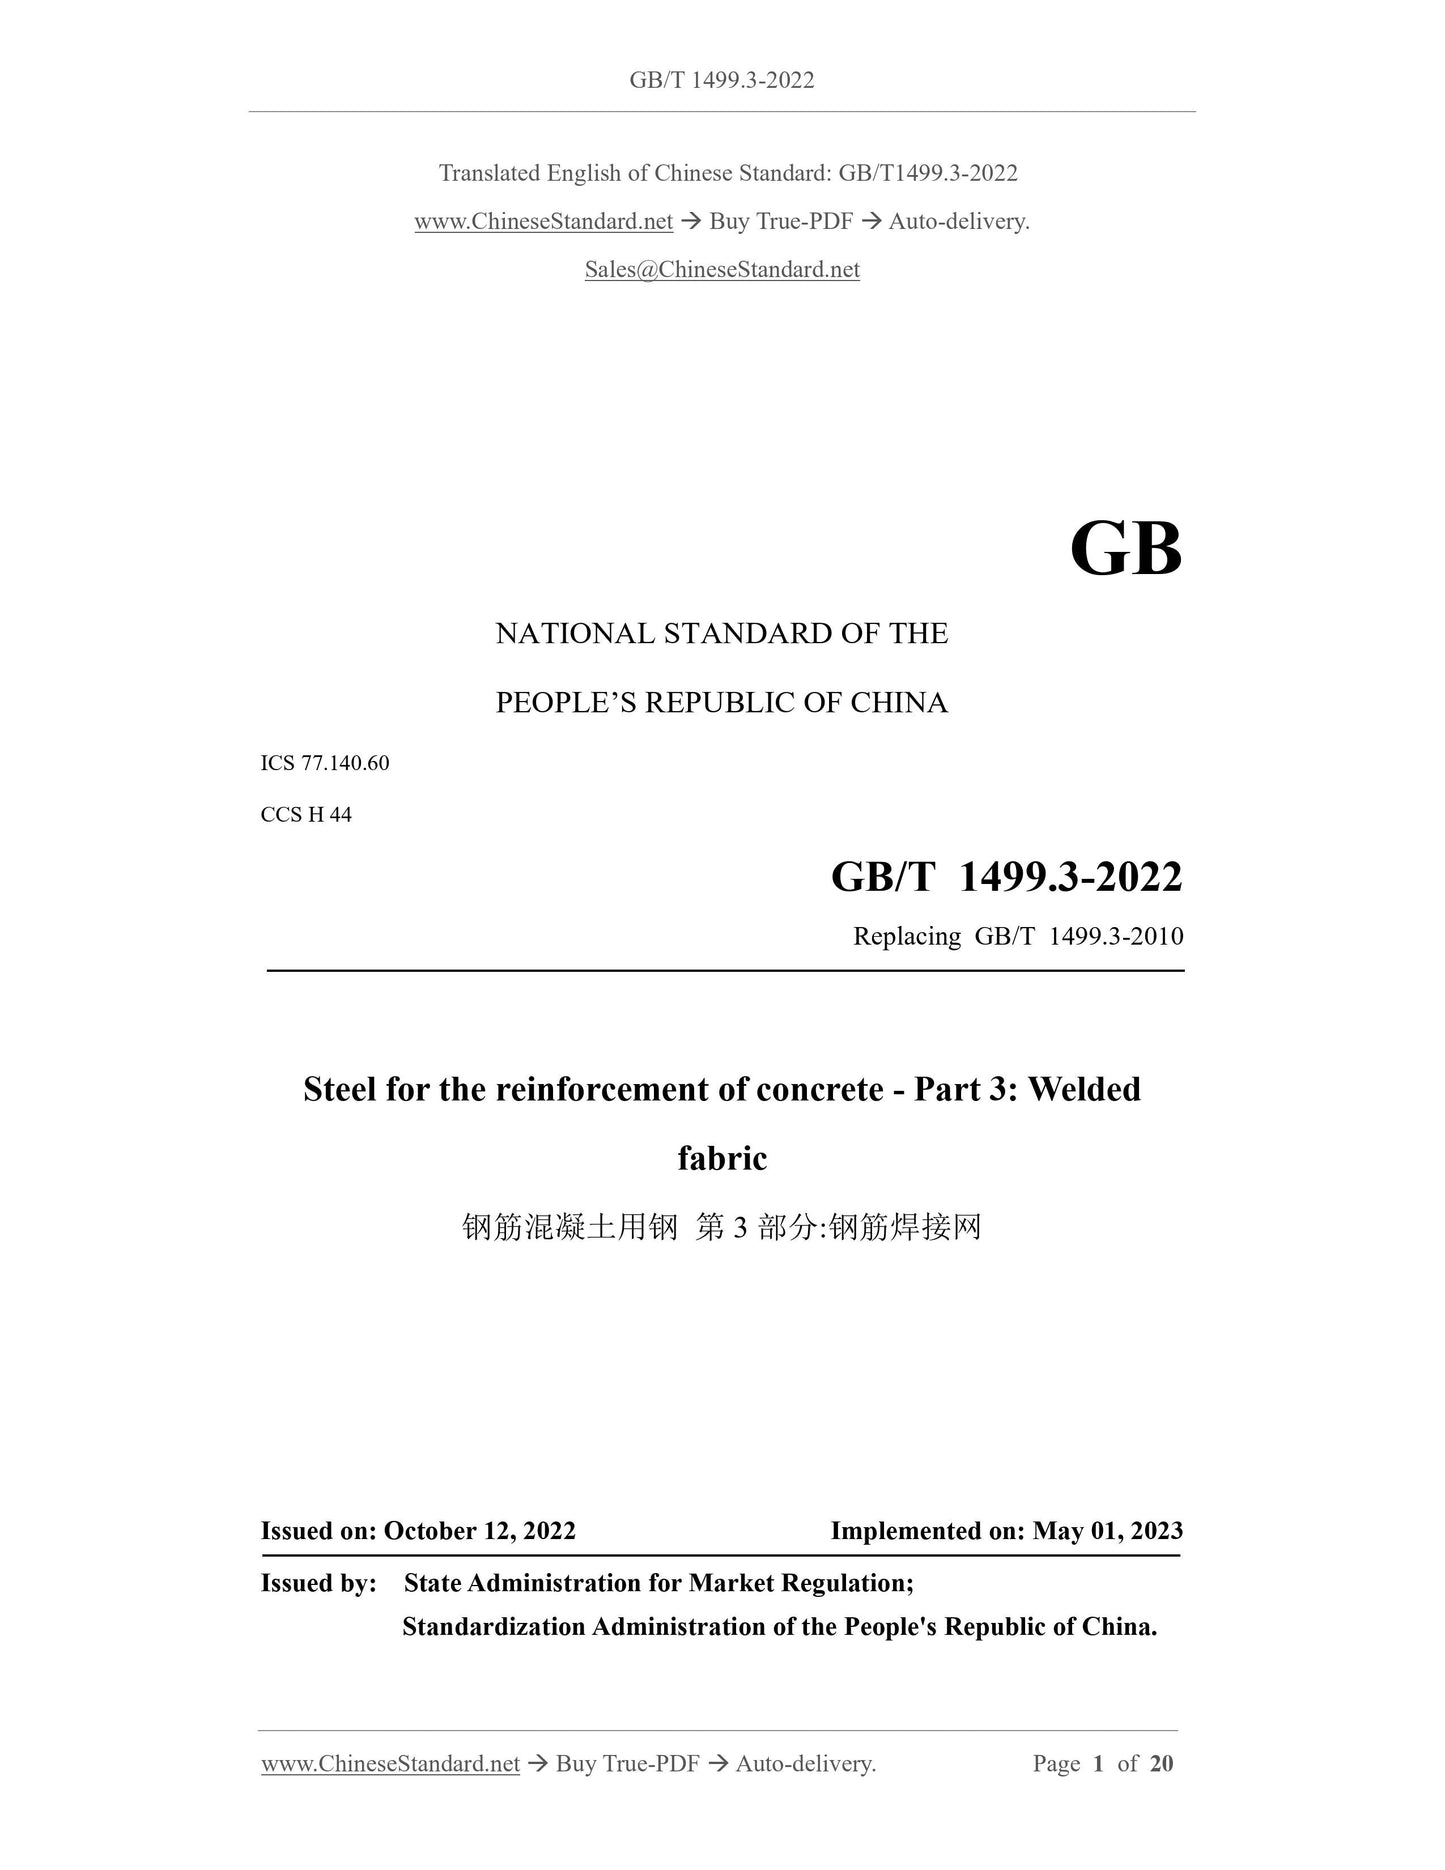 GB/T 1499.3-2022 Page 1